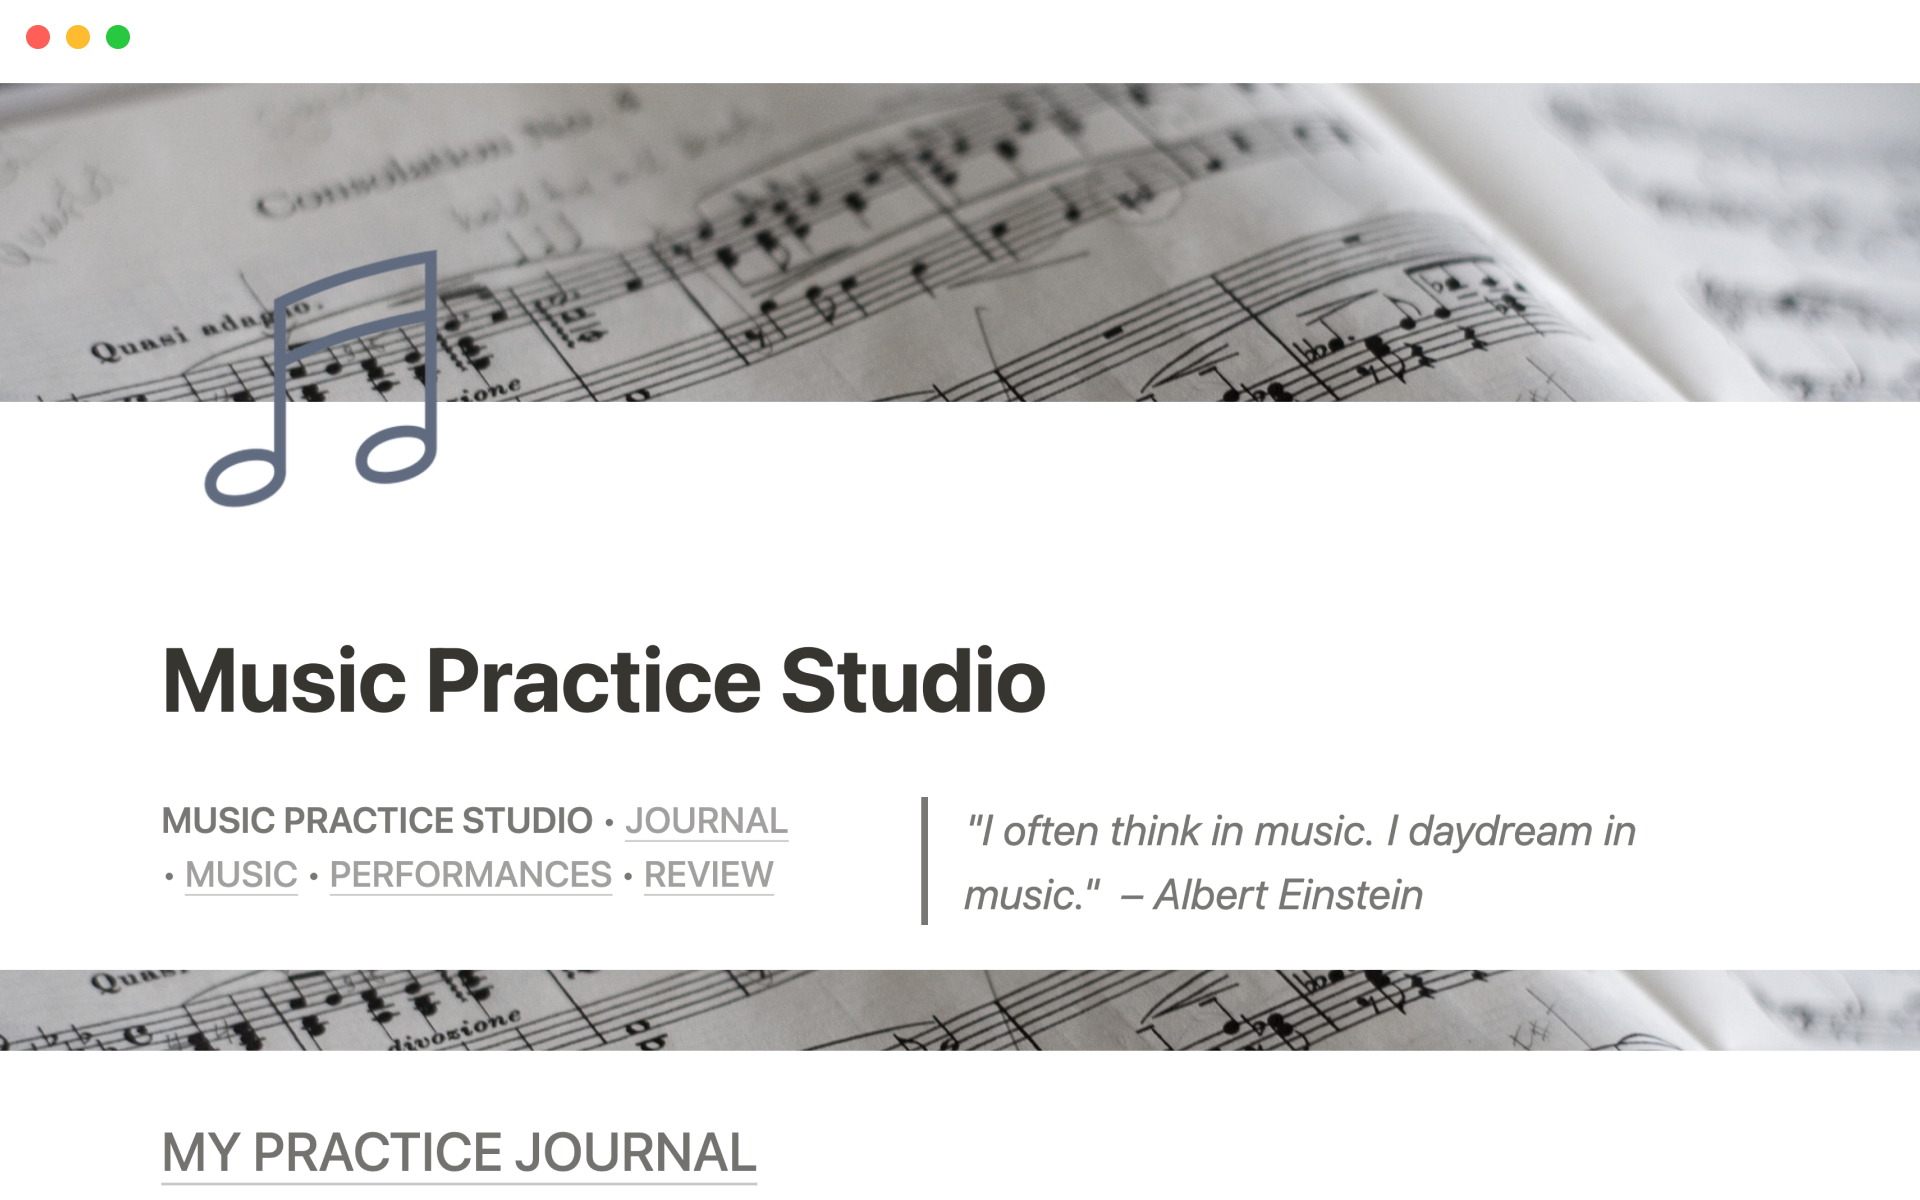 Designed to help musicians navigate their music practice.